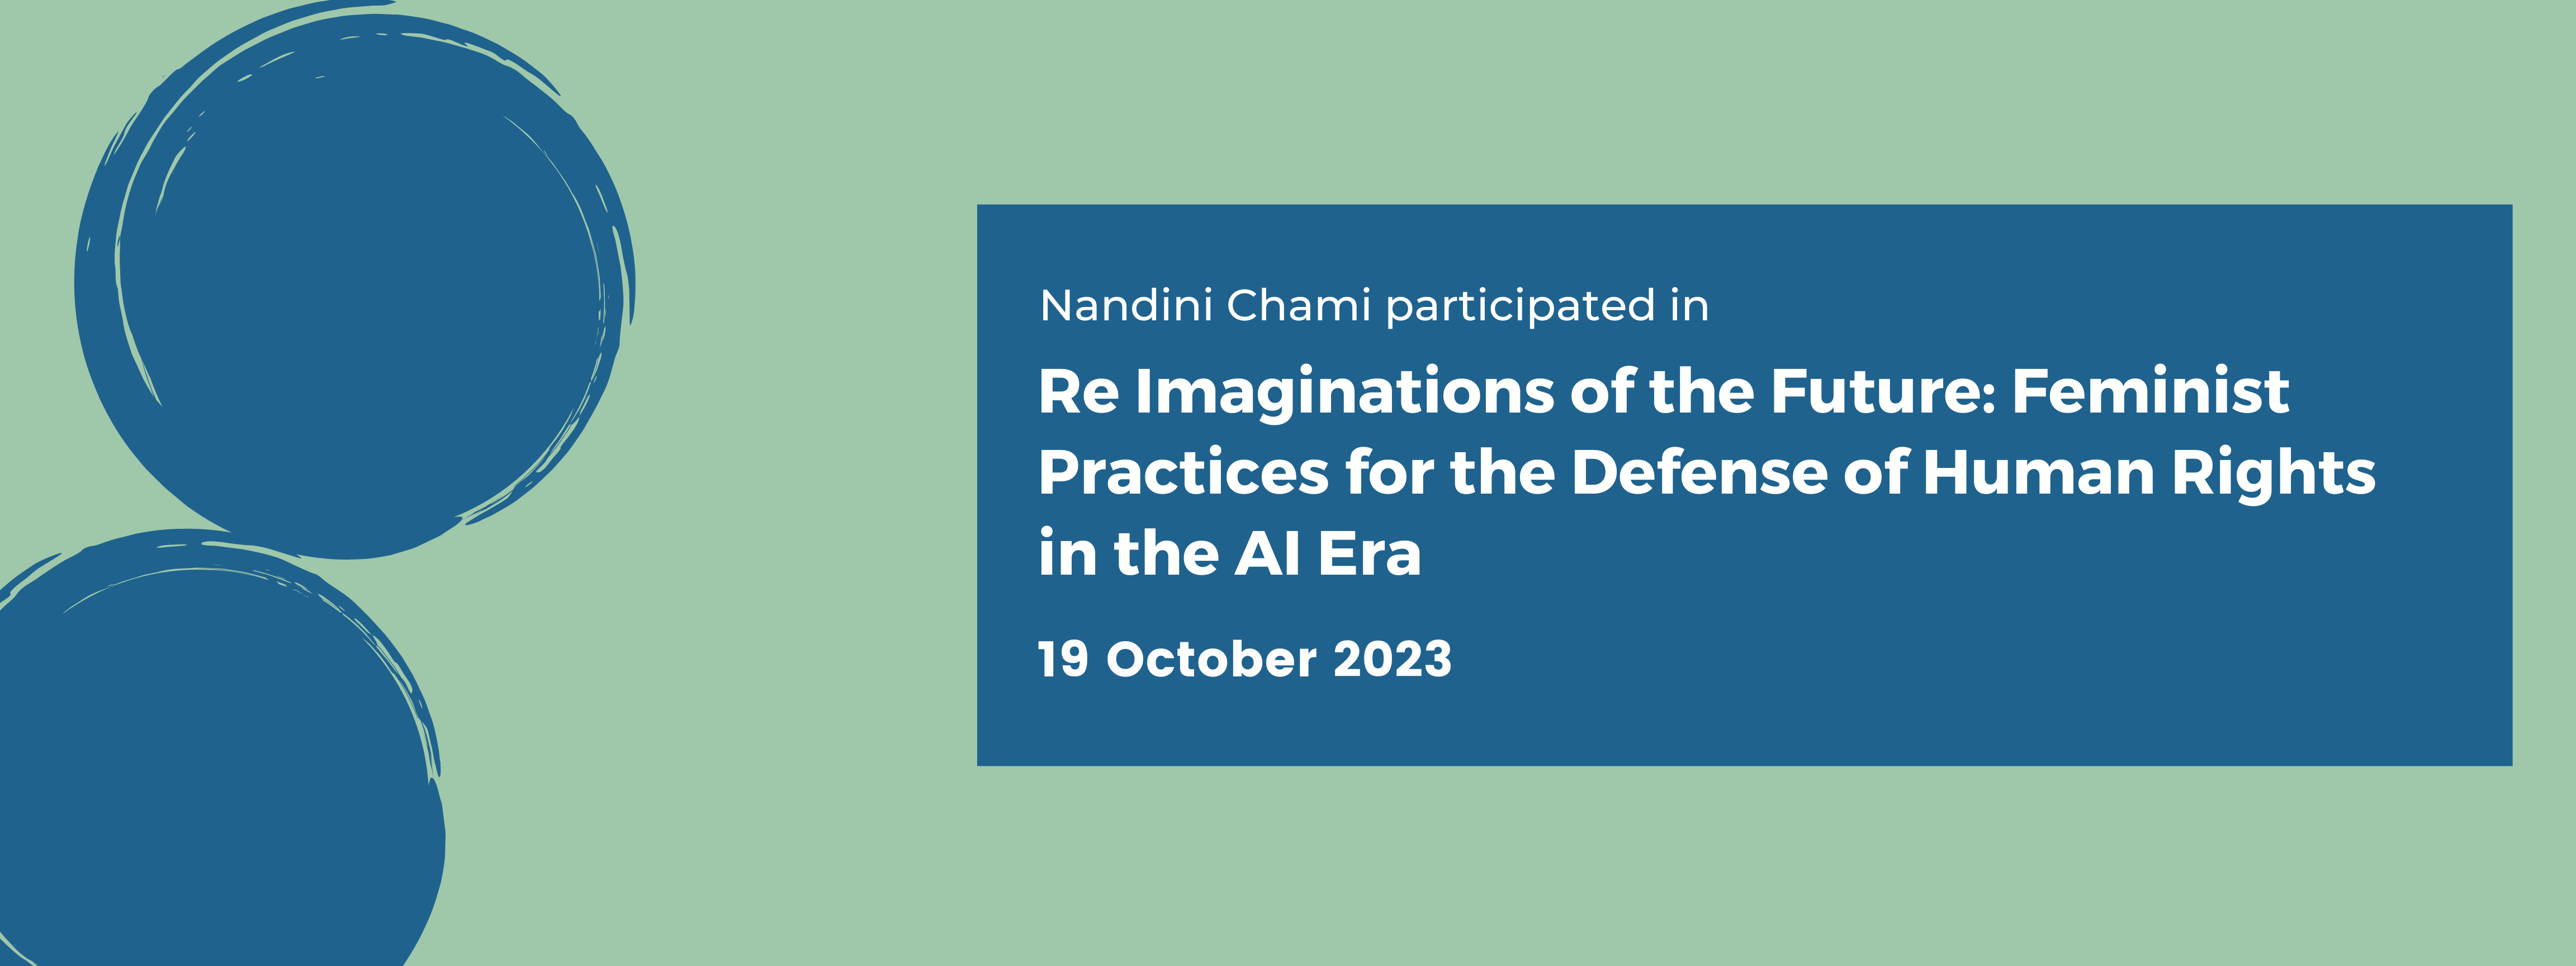 Re Imaginations of the Future: Feminist Practices for the Defense of Human Rights in the AI Era